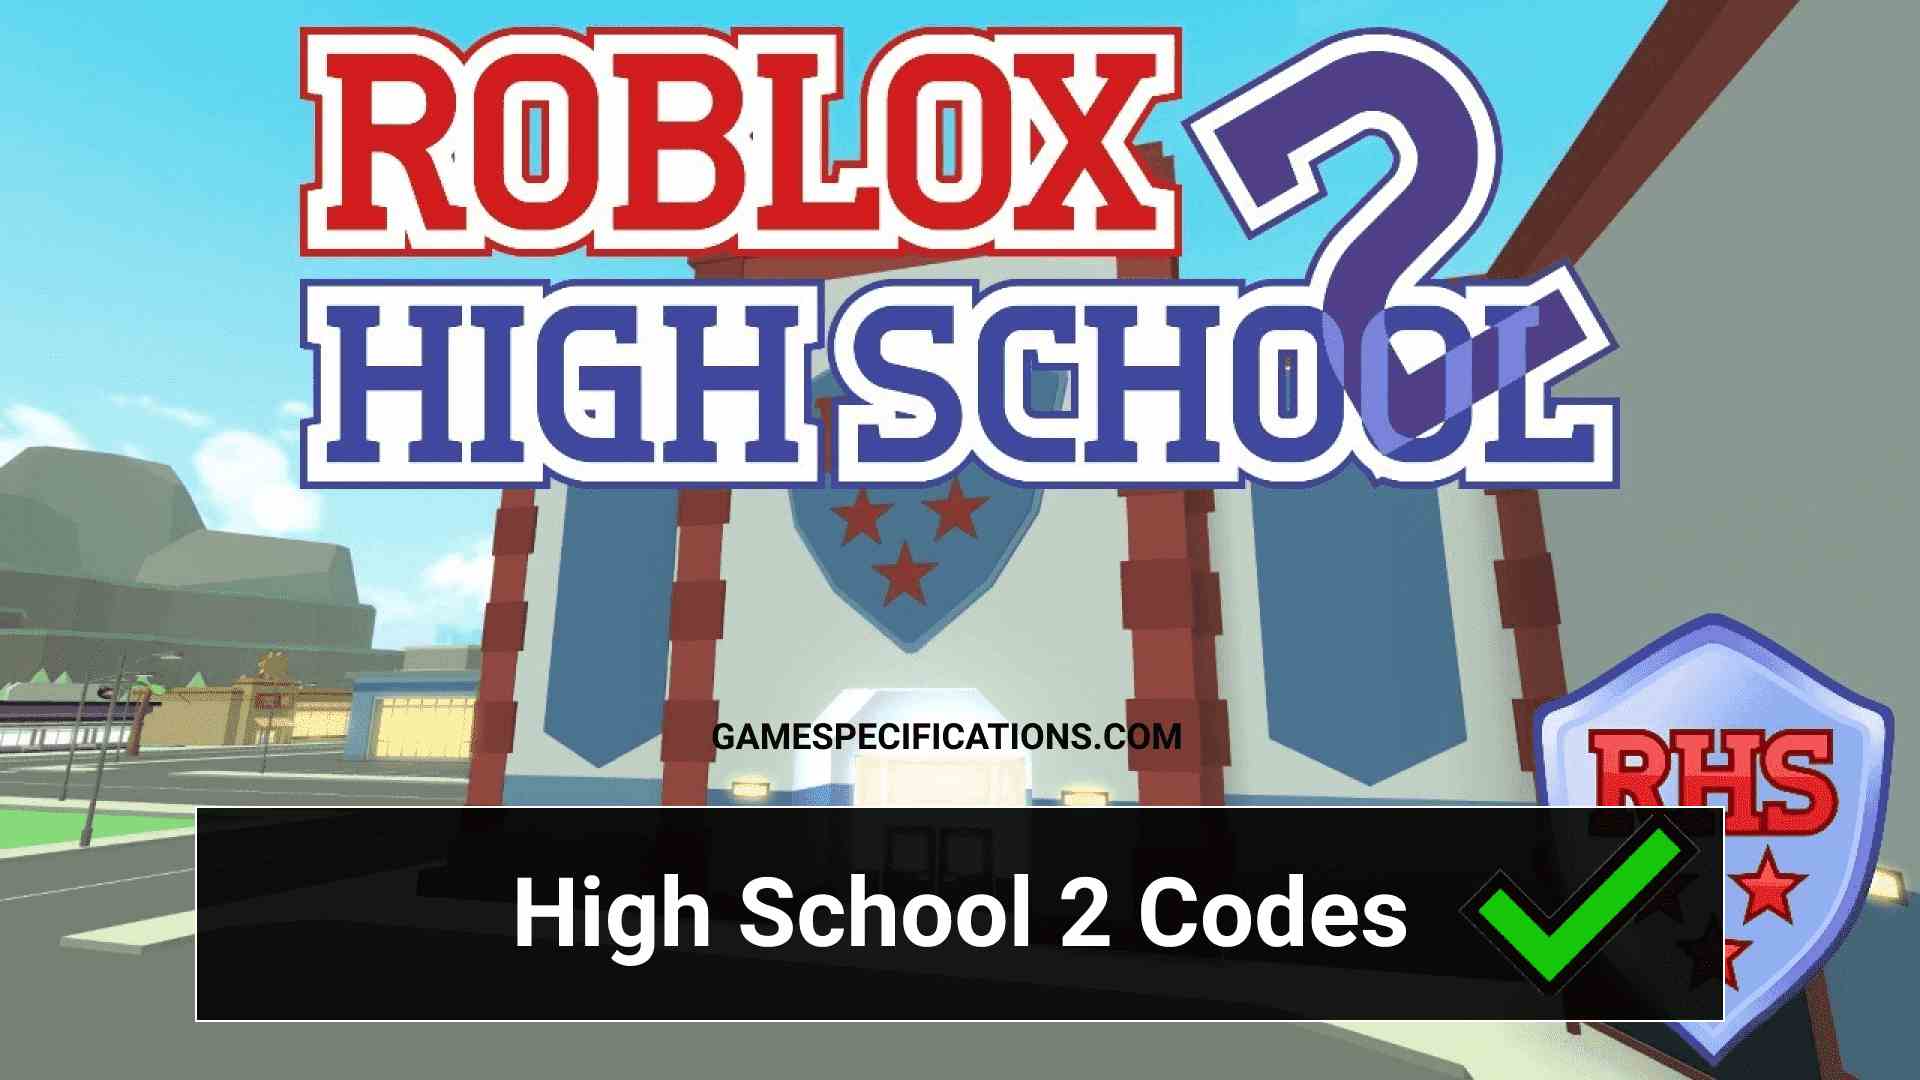 17 Working Roblox High School 2 Codes July 2021 Game Specifications - roblox highschool 2 codes for music